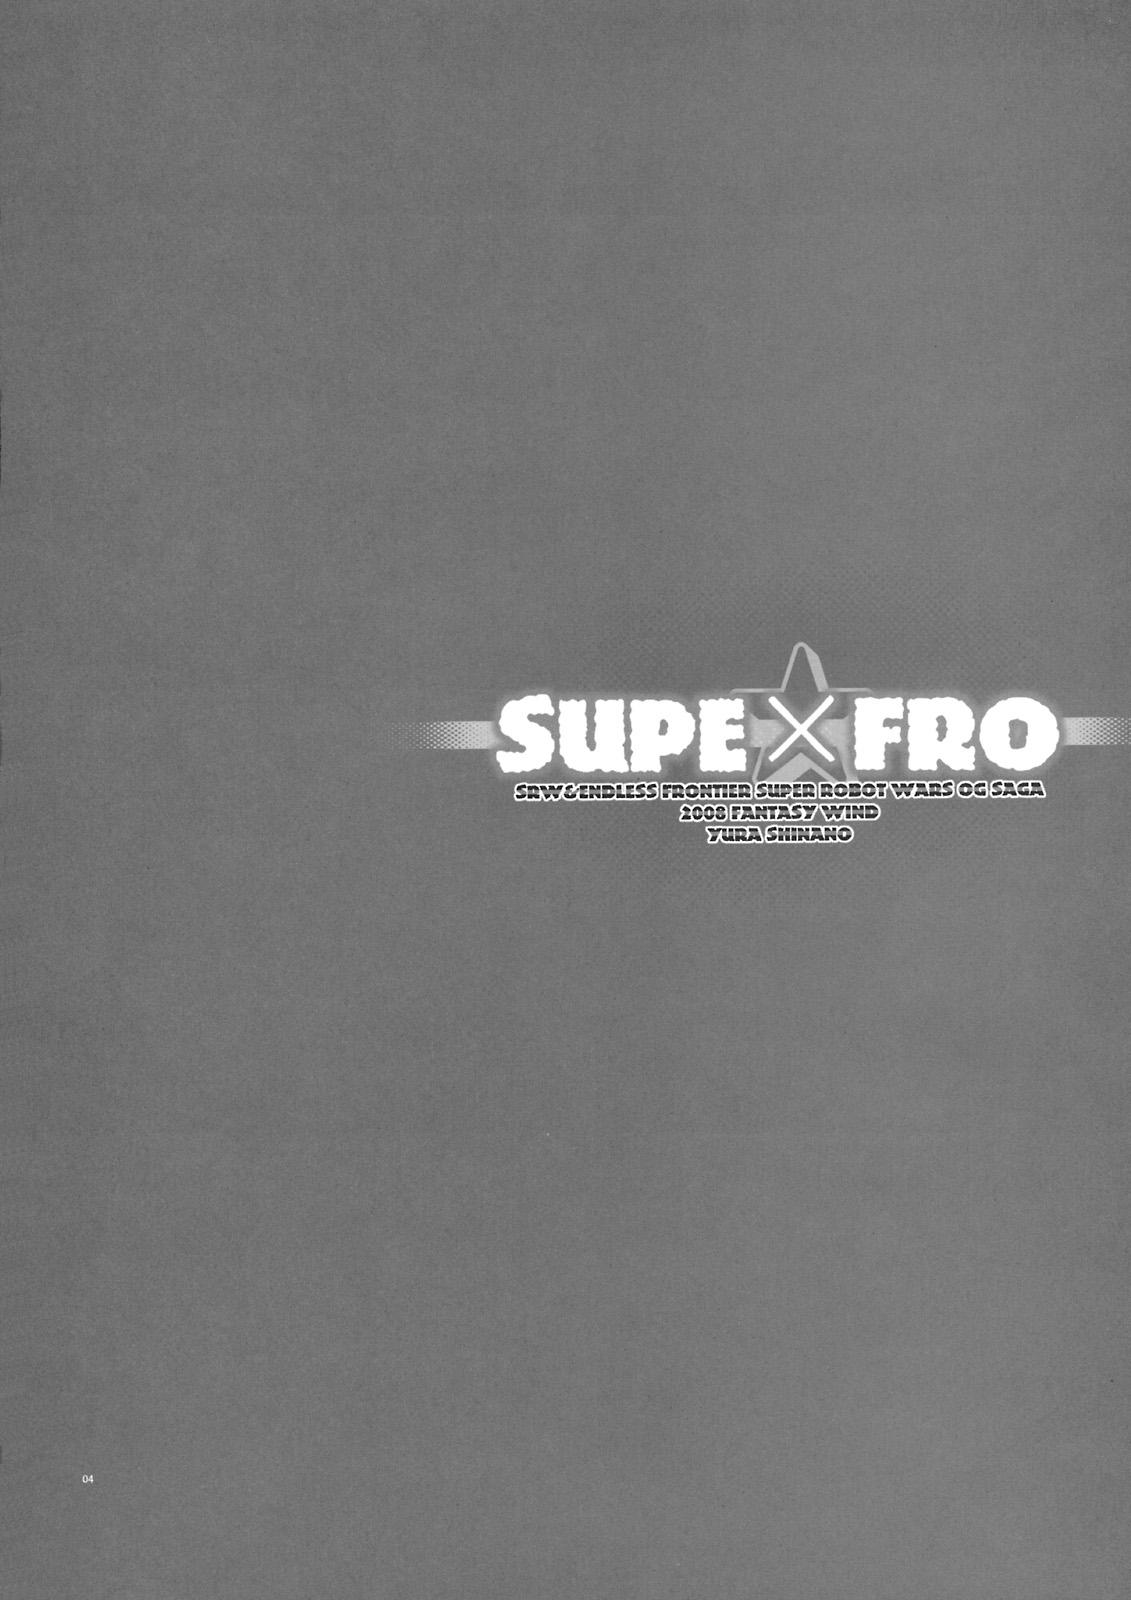 SuPE x FRO 2